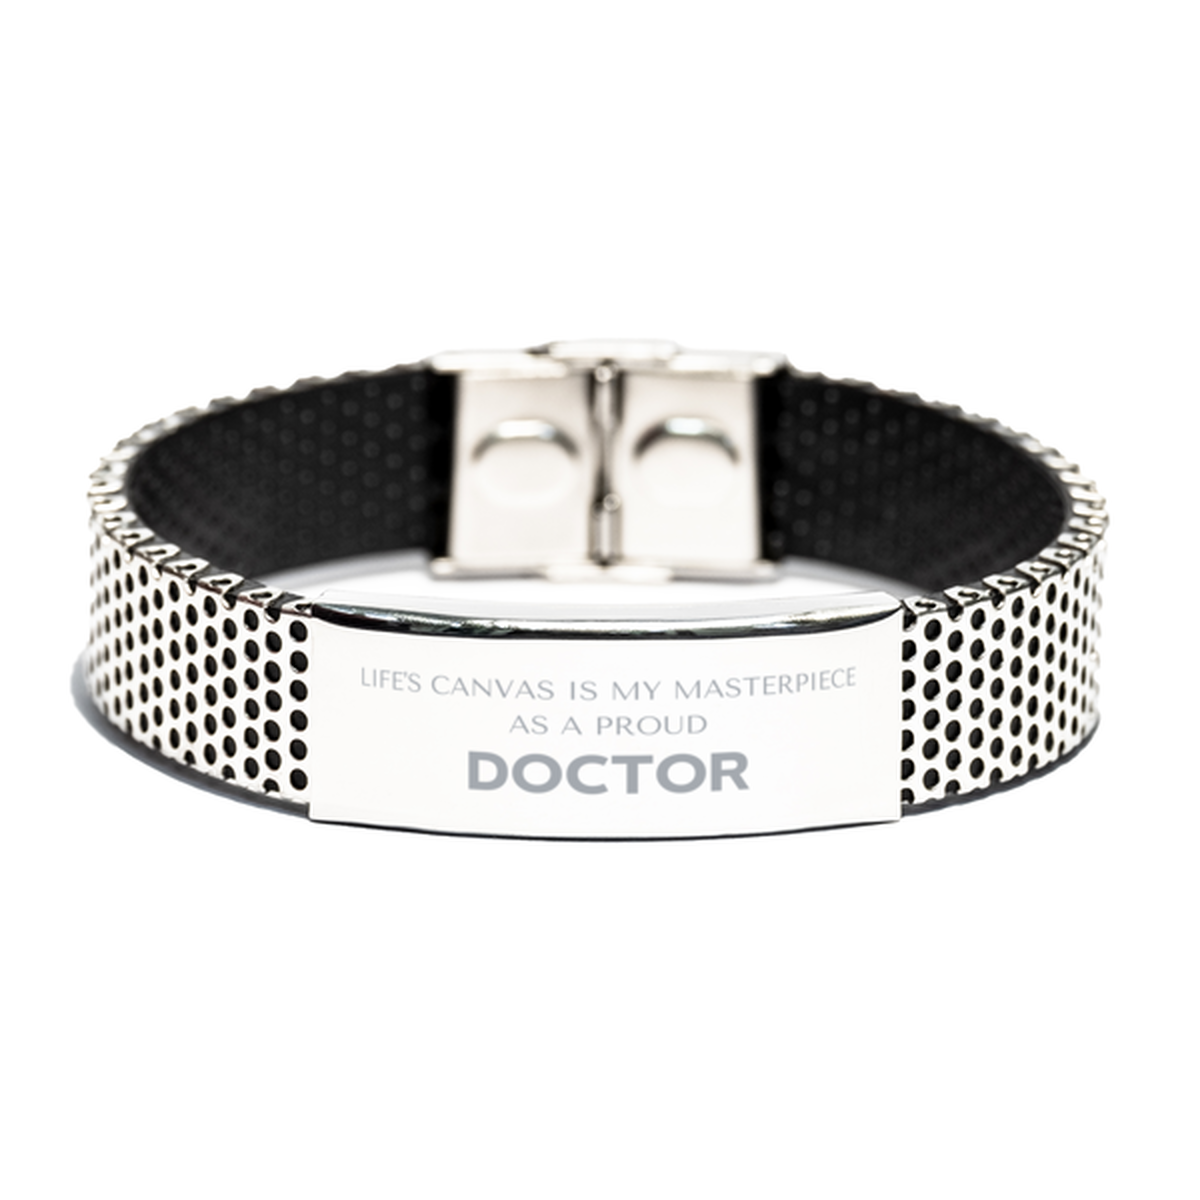 Proud Doctor Gifts, Life's canvas is my masterpiece, Epic Birthday Christmas Unique Stainless Steel Bracelet For Doctor, Coworkers, Men, Women, Friends